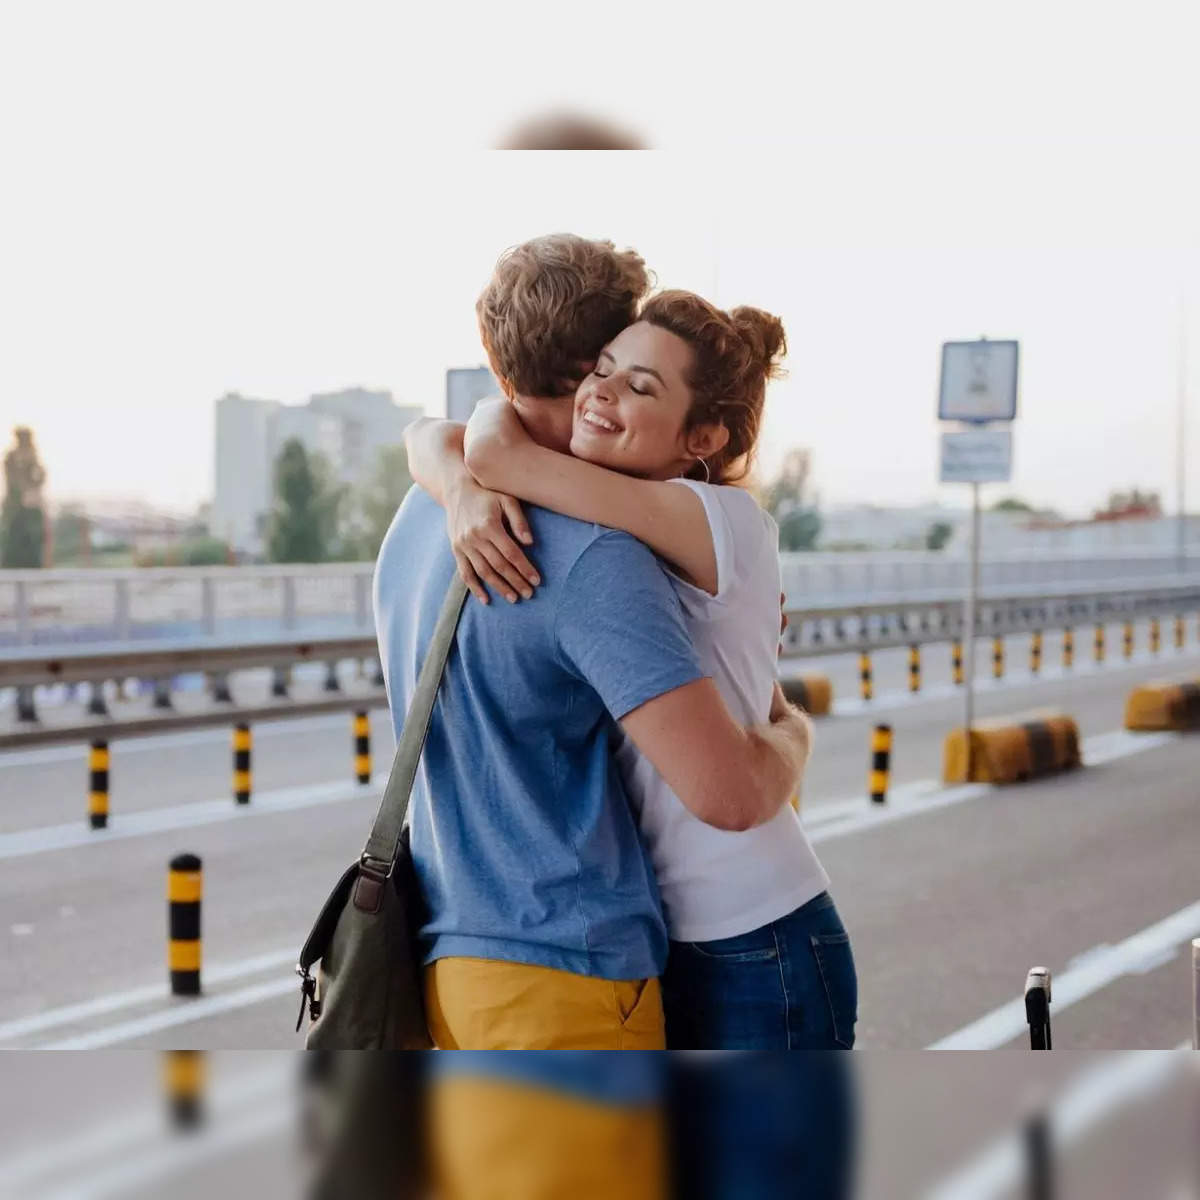 Hug Day 2022: Why hugging is the universal expression of love and care -  The Economic Times